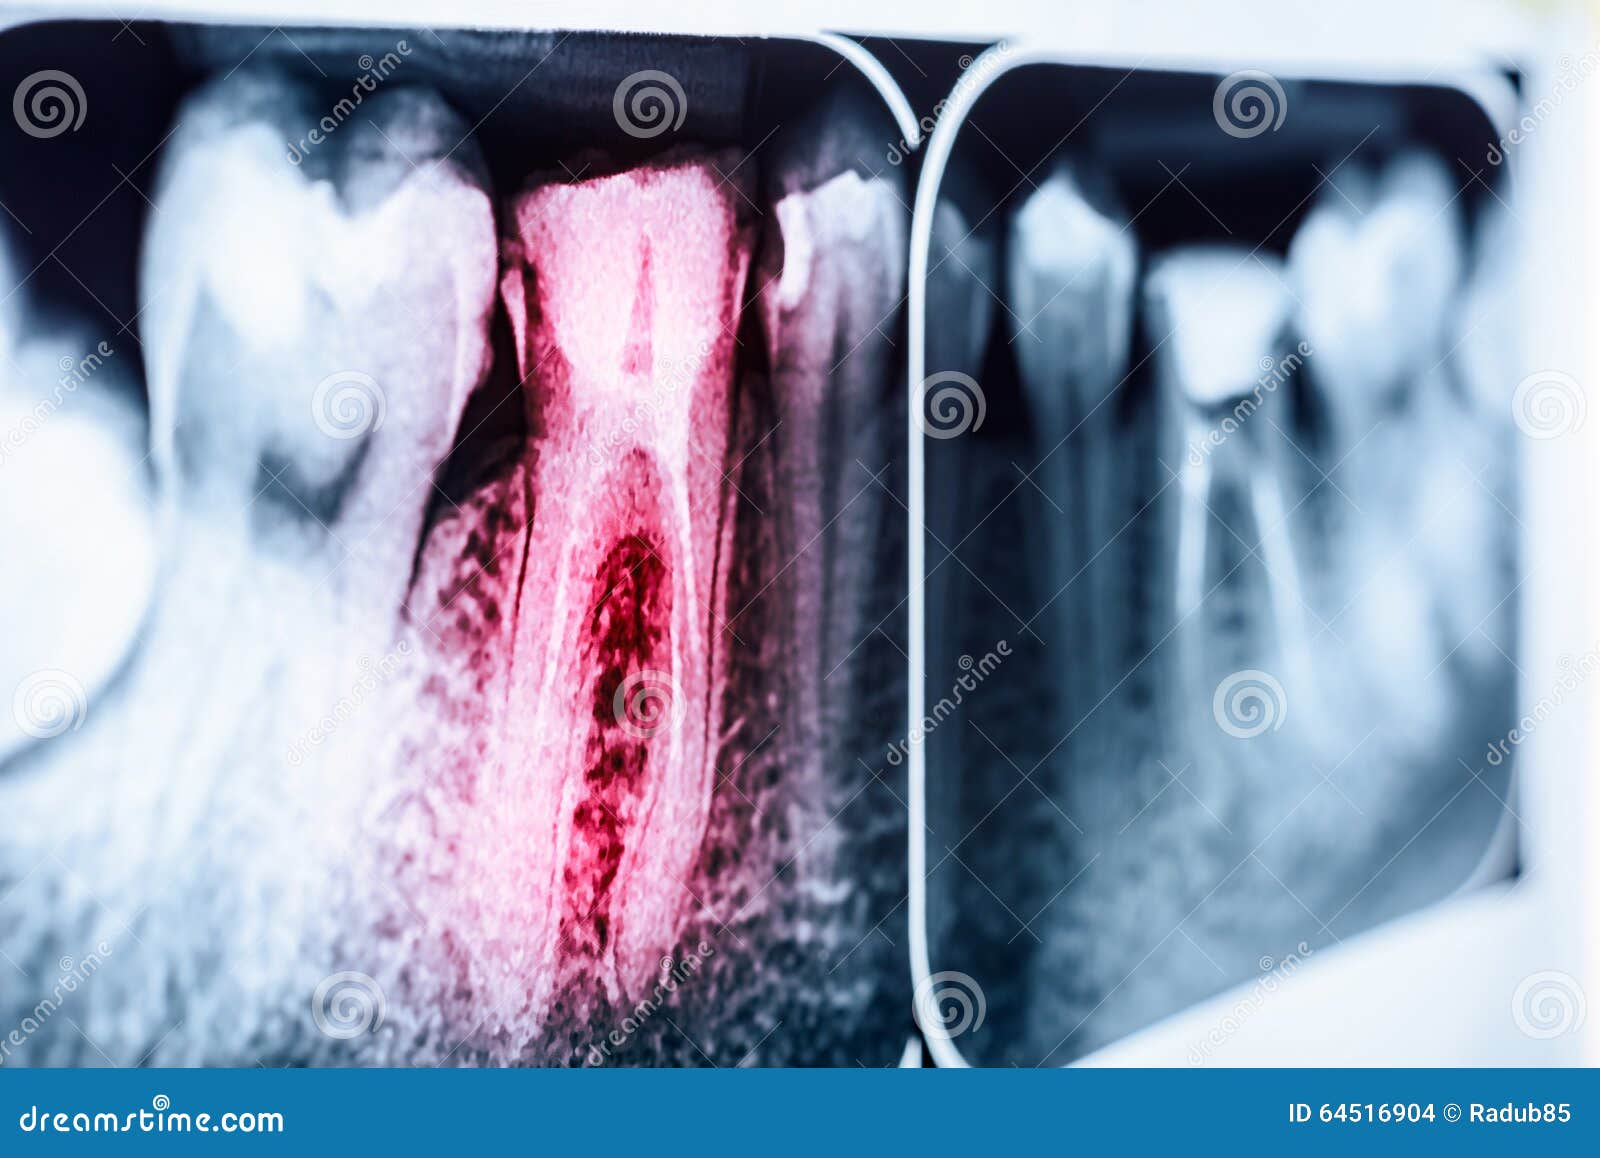 pain of tooth decay on x-ray